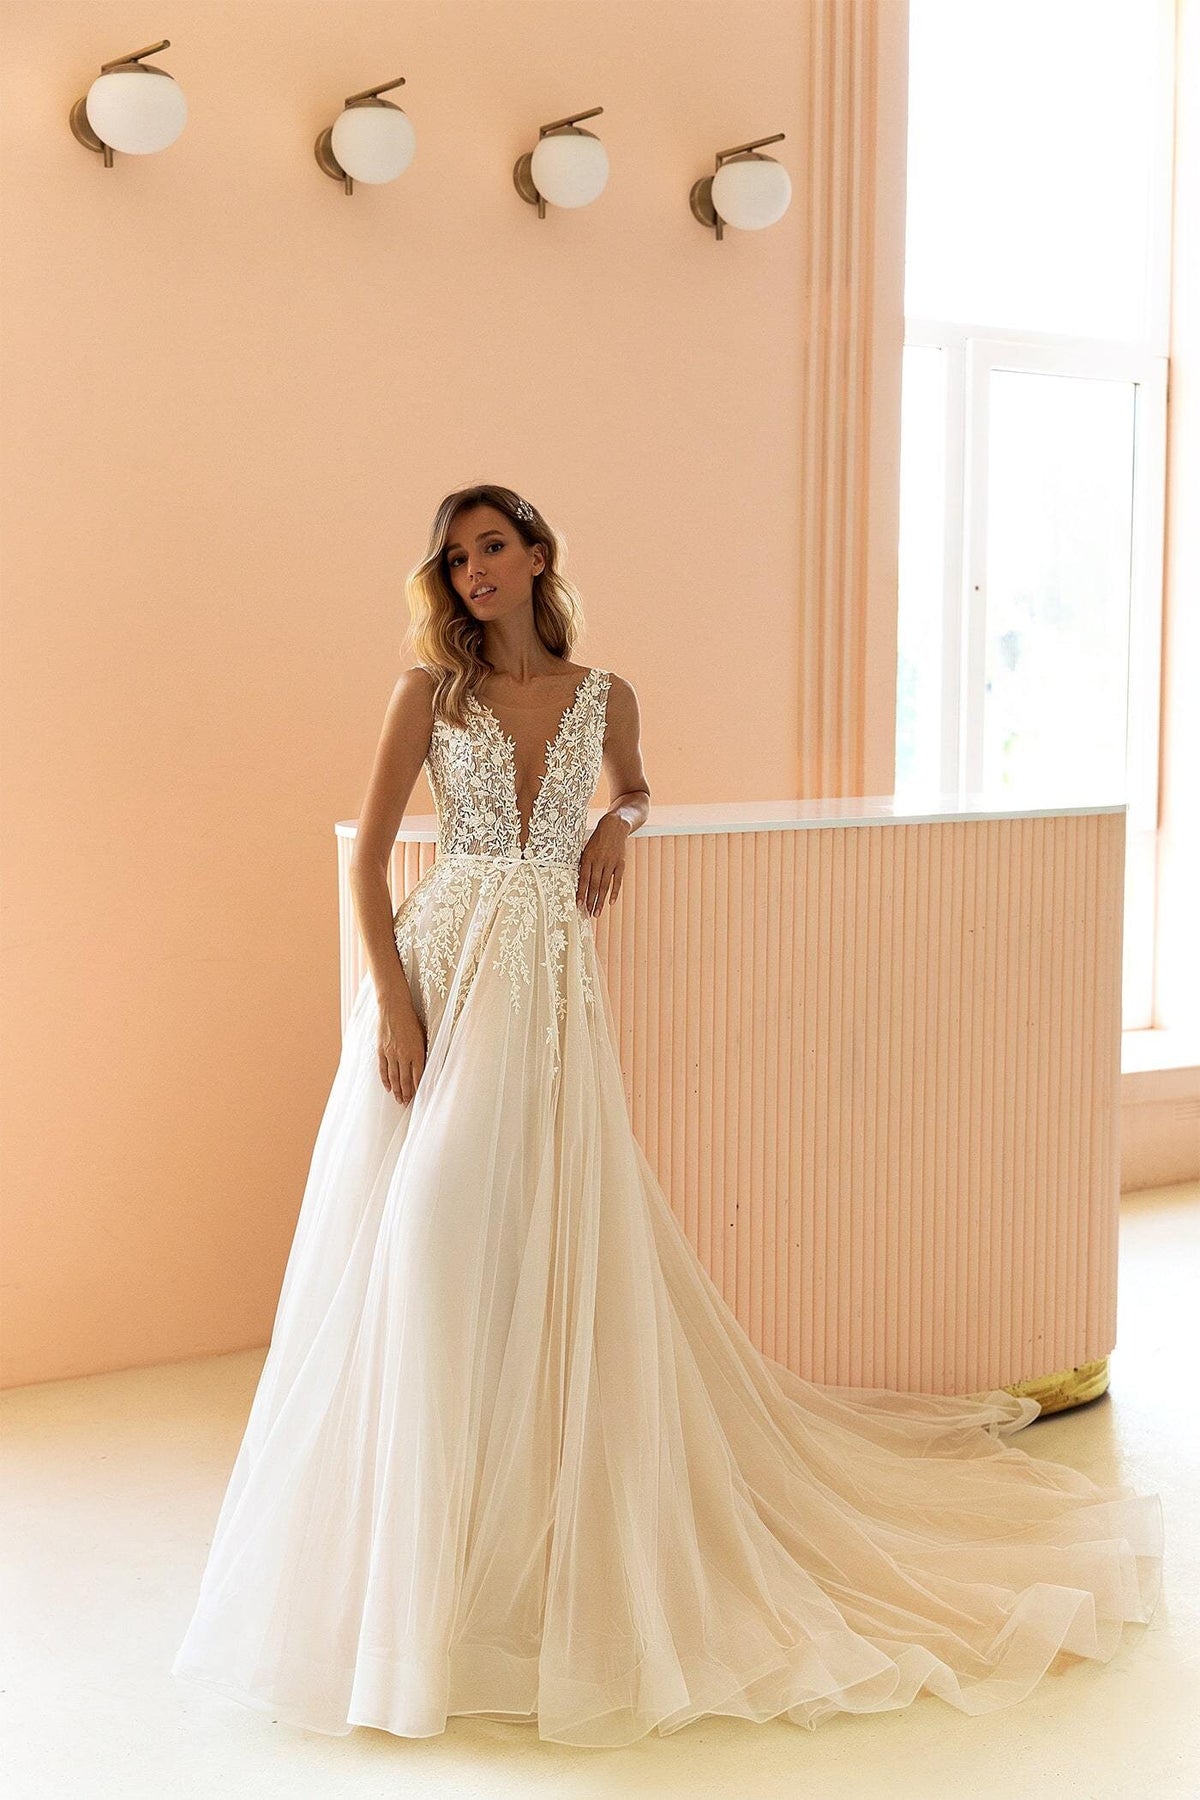 Beautiful Unique Aline Deep V Neckline Sleeveless Floral Lace Wedding Dress Bridal Gown with Train Buttons